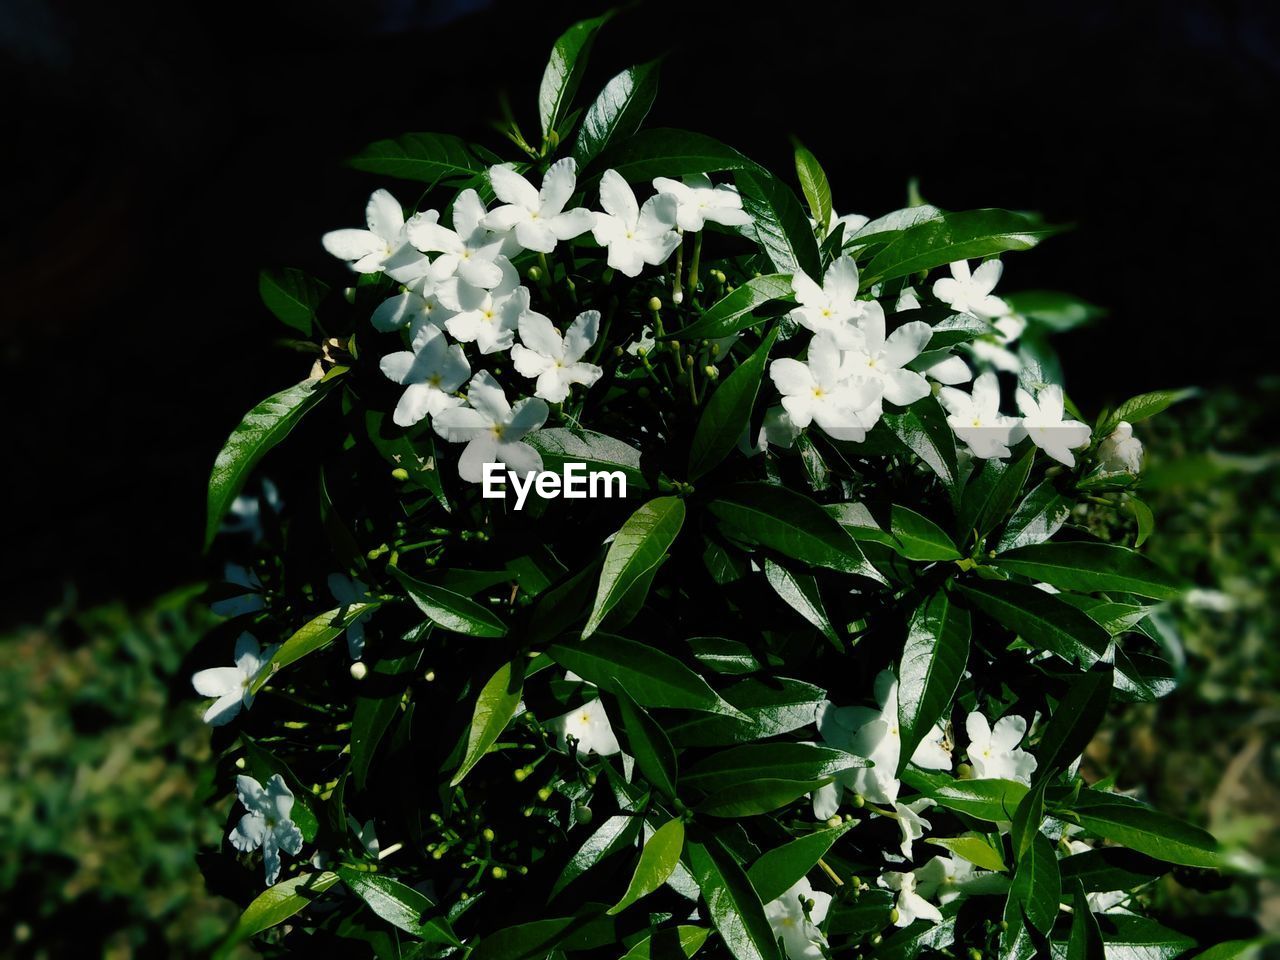 CLOSE UP OF WHITE FLOWERING PLANT